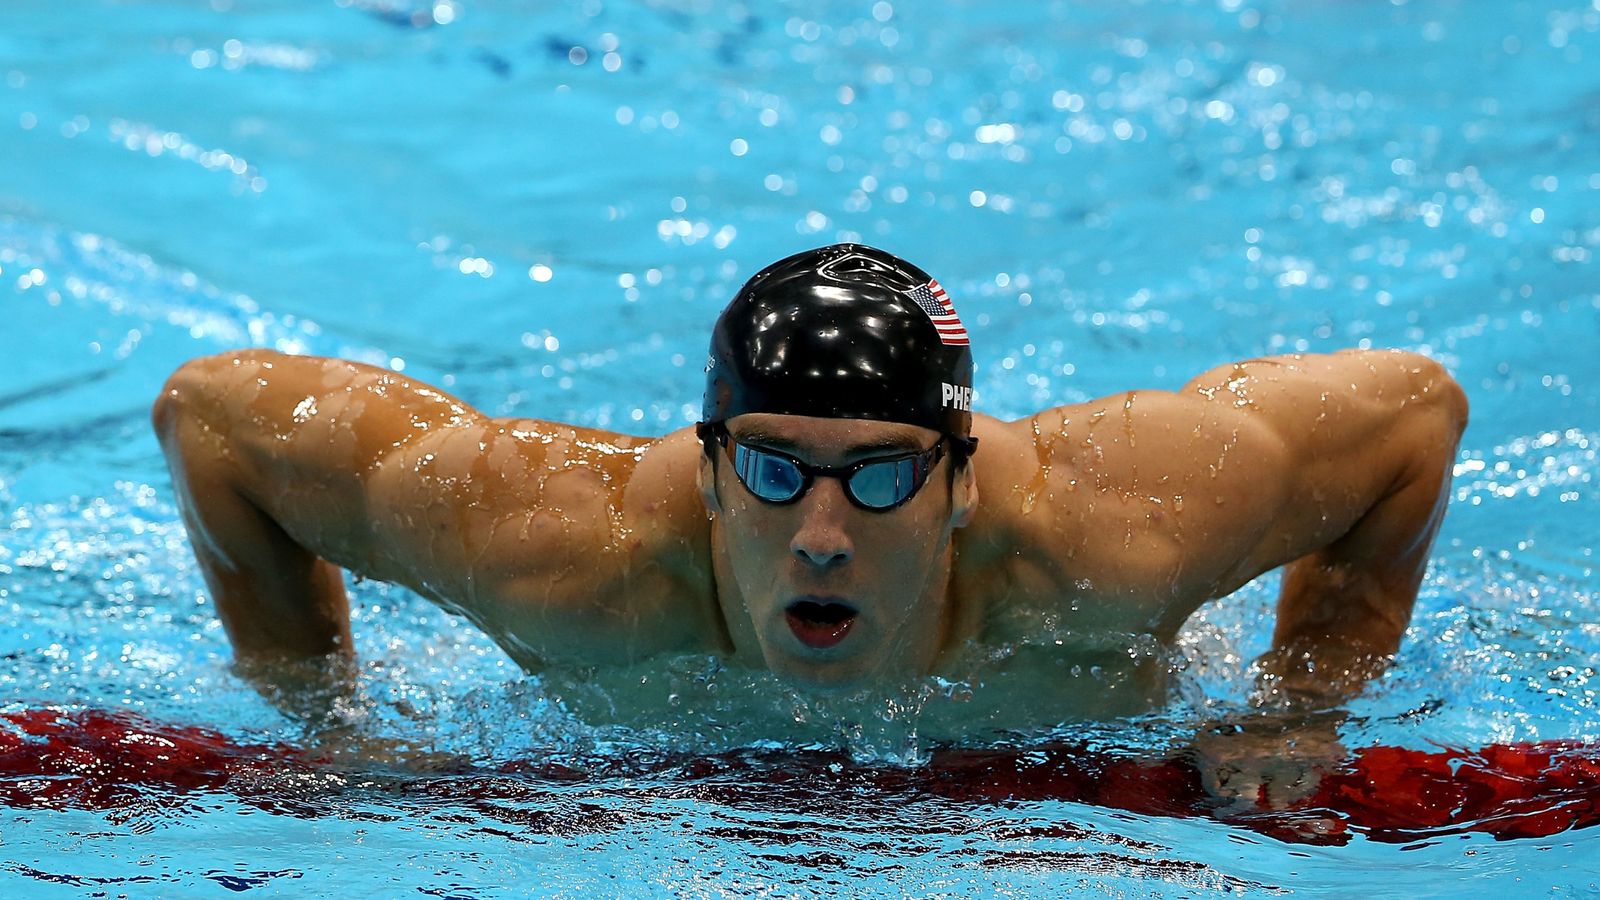 Michael Phelps World's greatest swimmer says depression drove him to